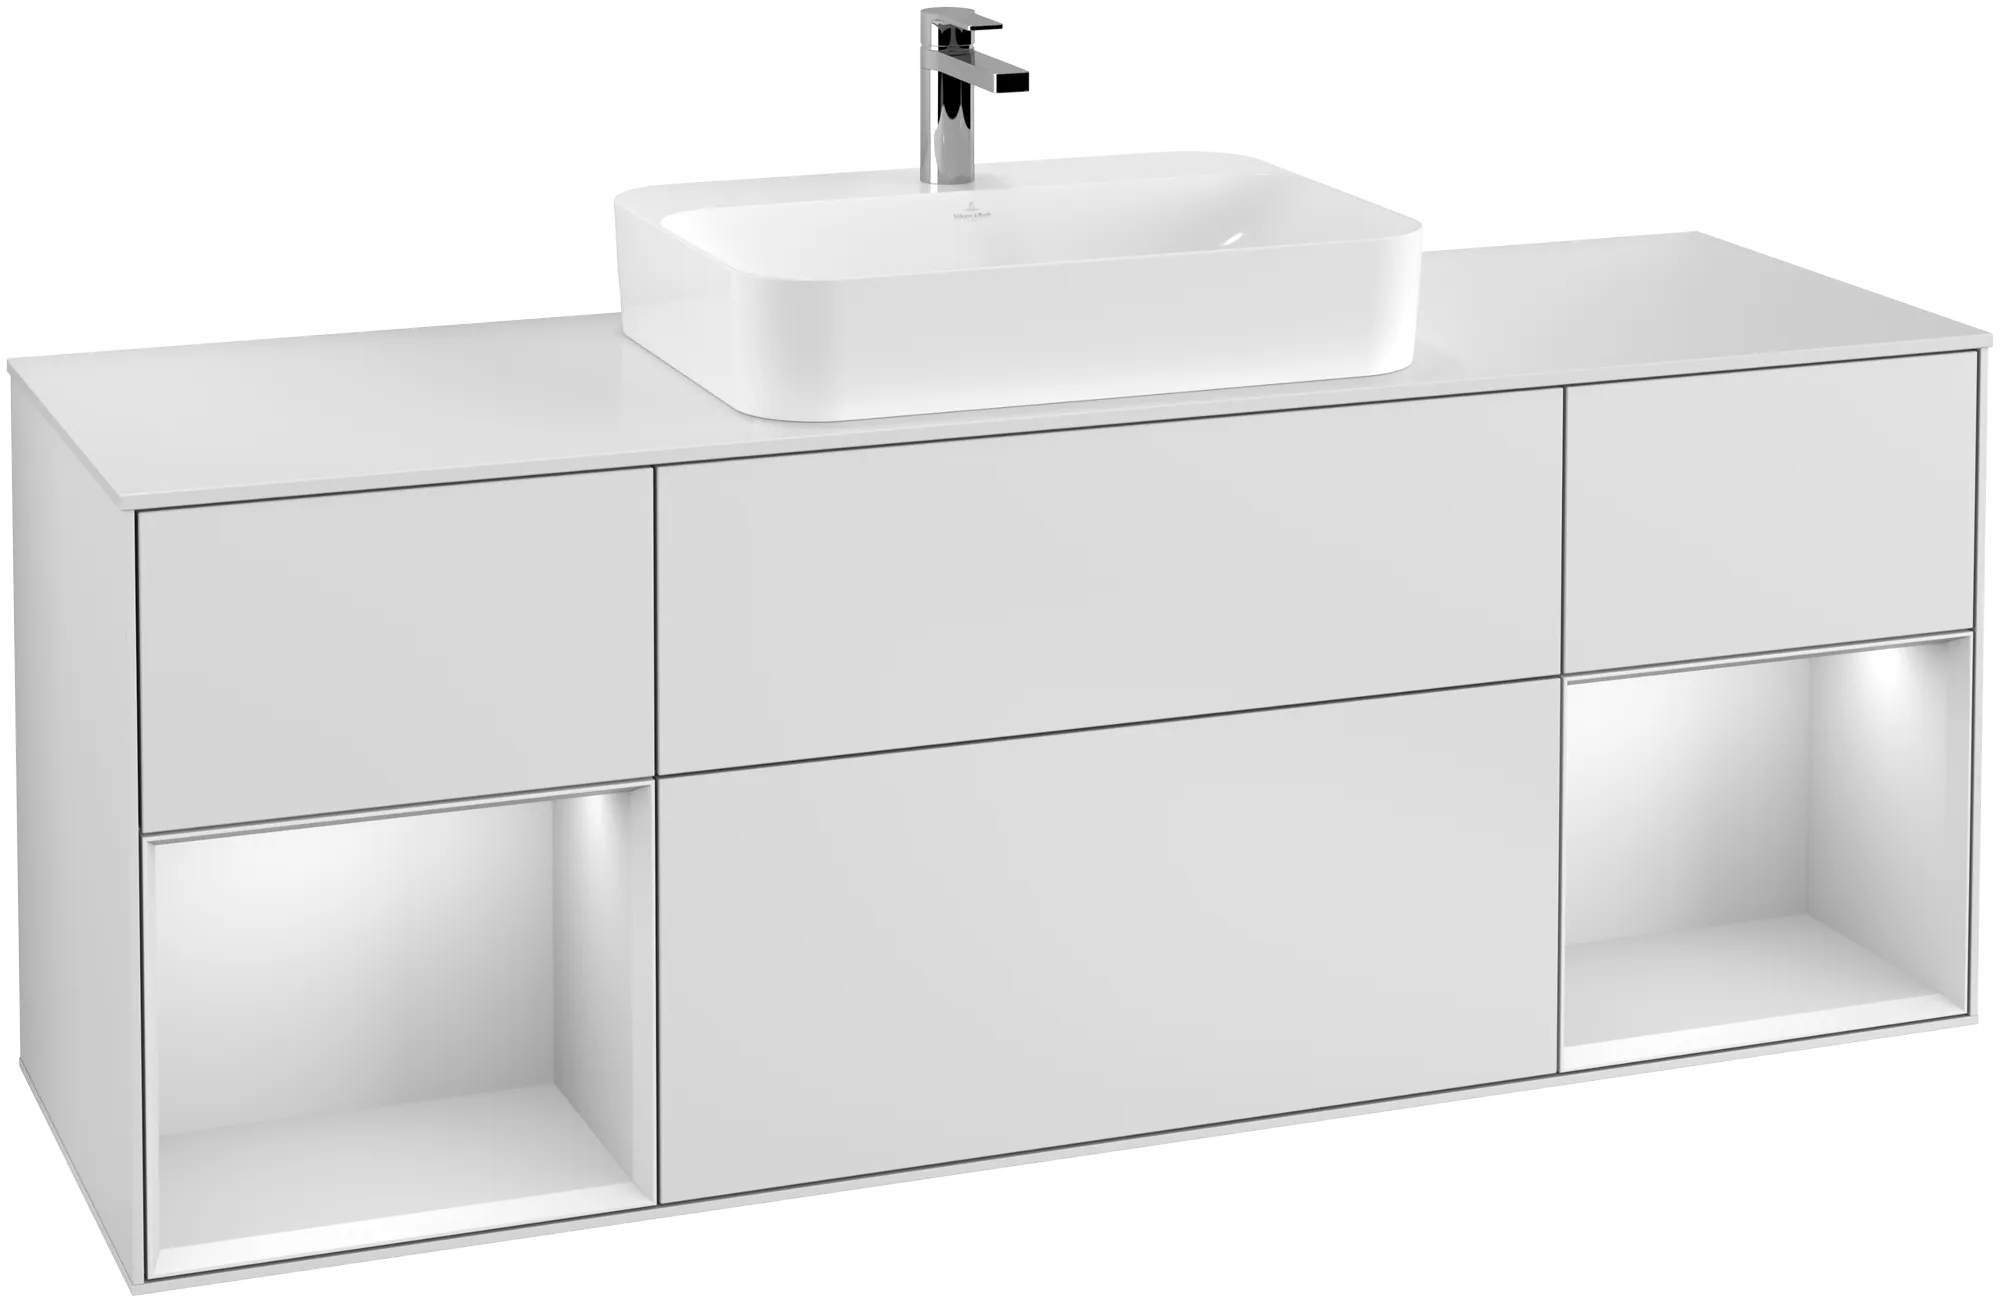 Obrázek VILLEROY BOCH Finion Vanity unit, with lighting, 4 pull-out compartments, 1600 x 603 x 501 mm, White Matt Lacquer / White Matt Lacquer / Glass White Matt #G451MTMT